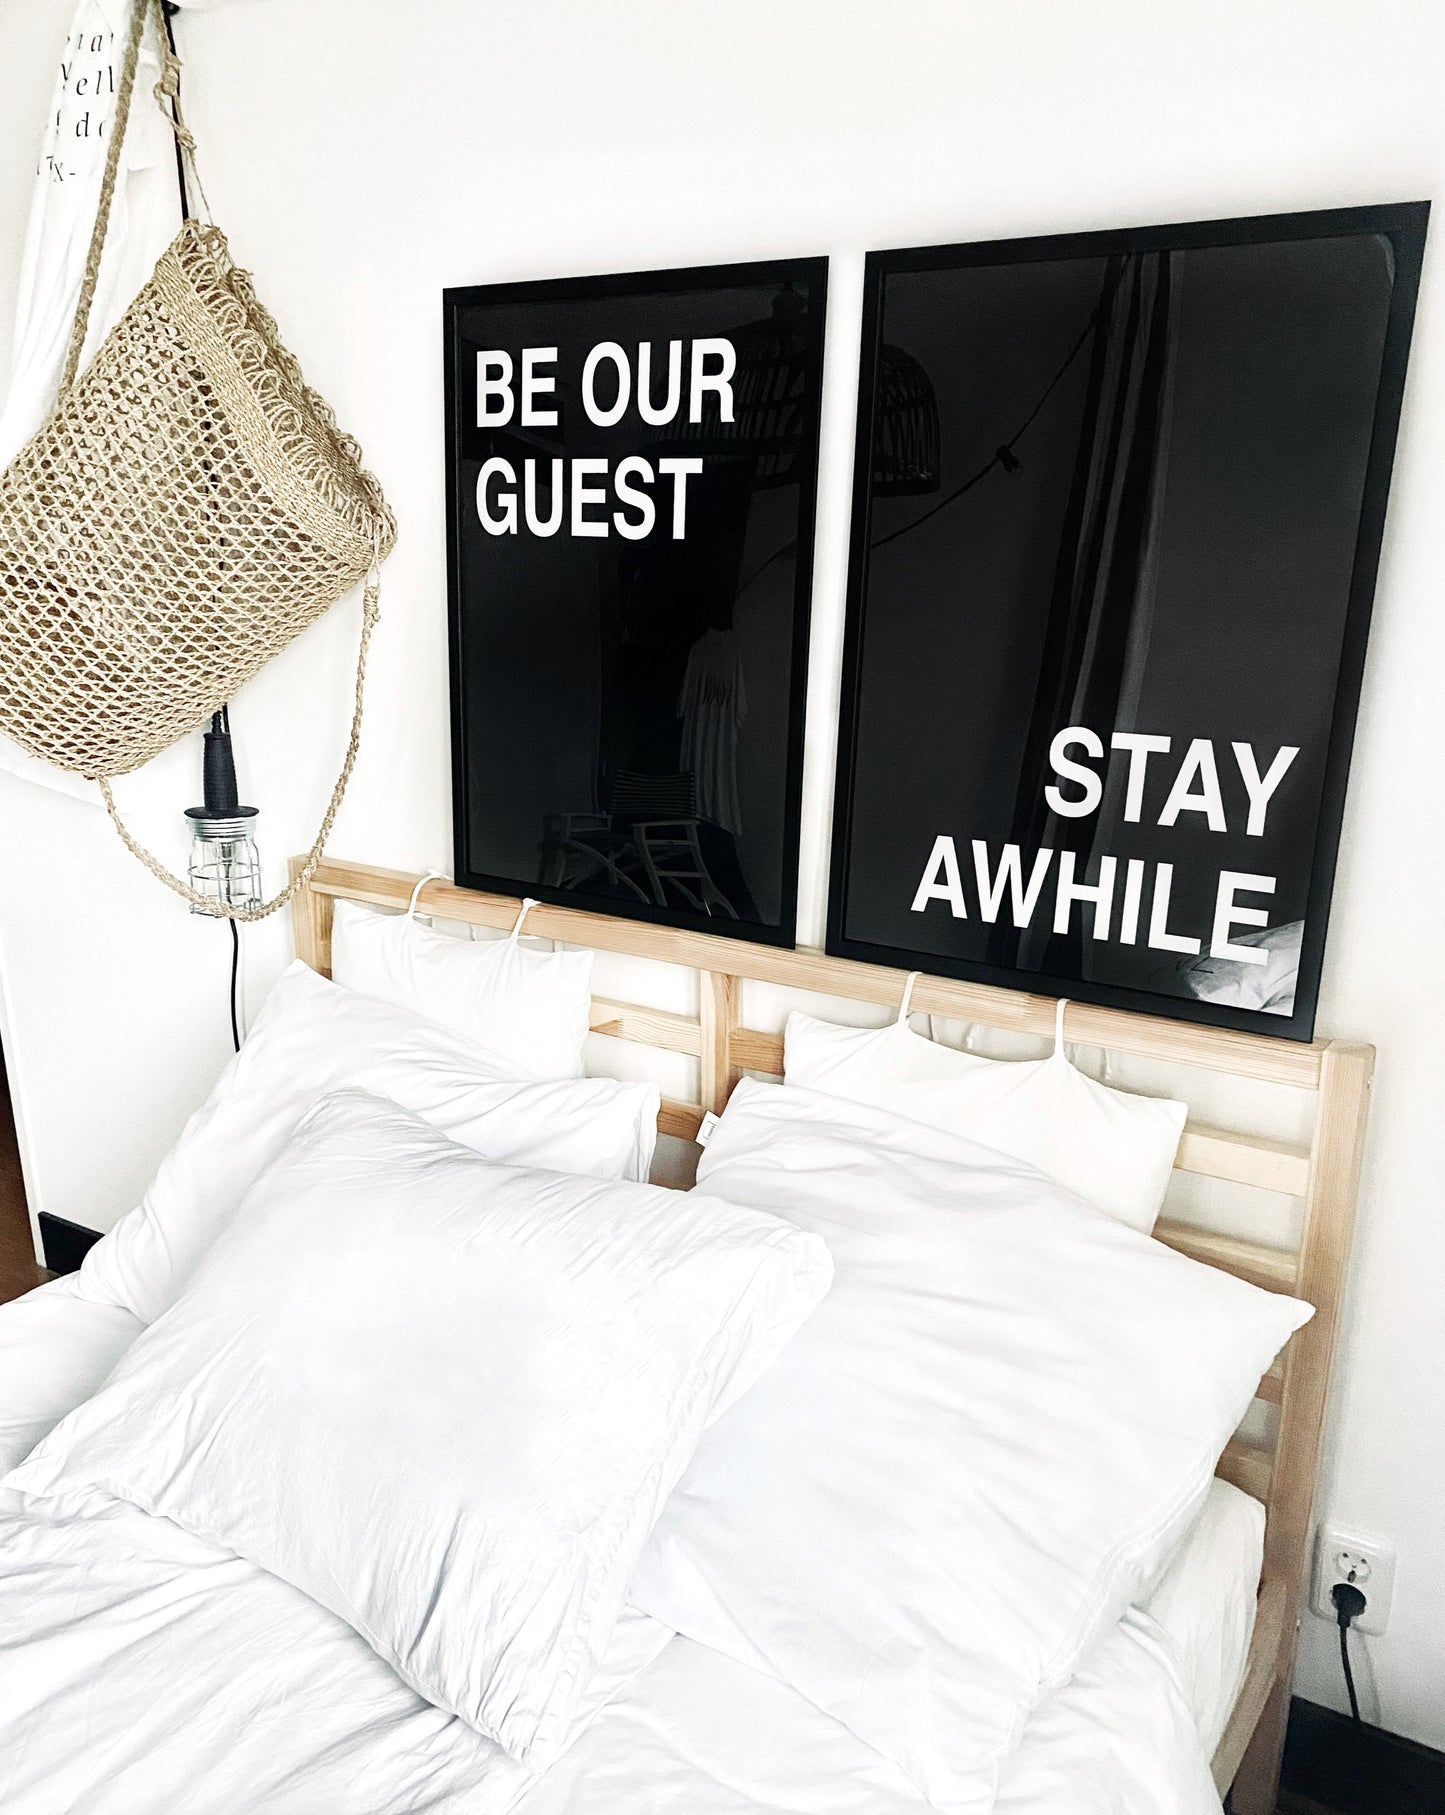 huisjevansanne poster zwart wit met tekst be our guest, stay awhile